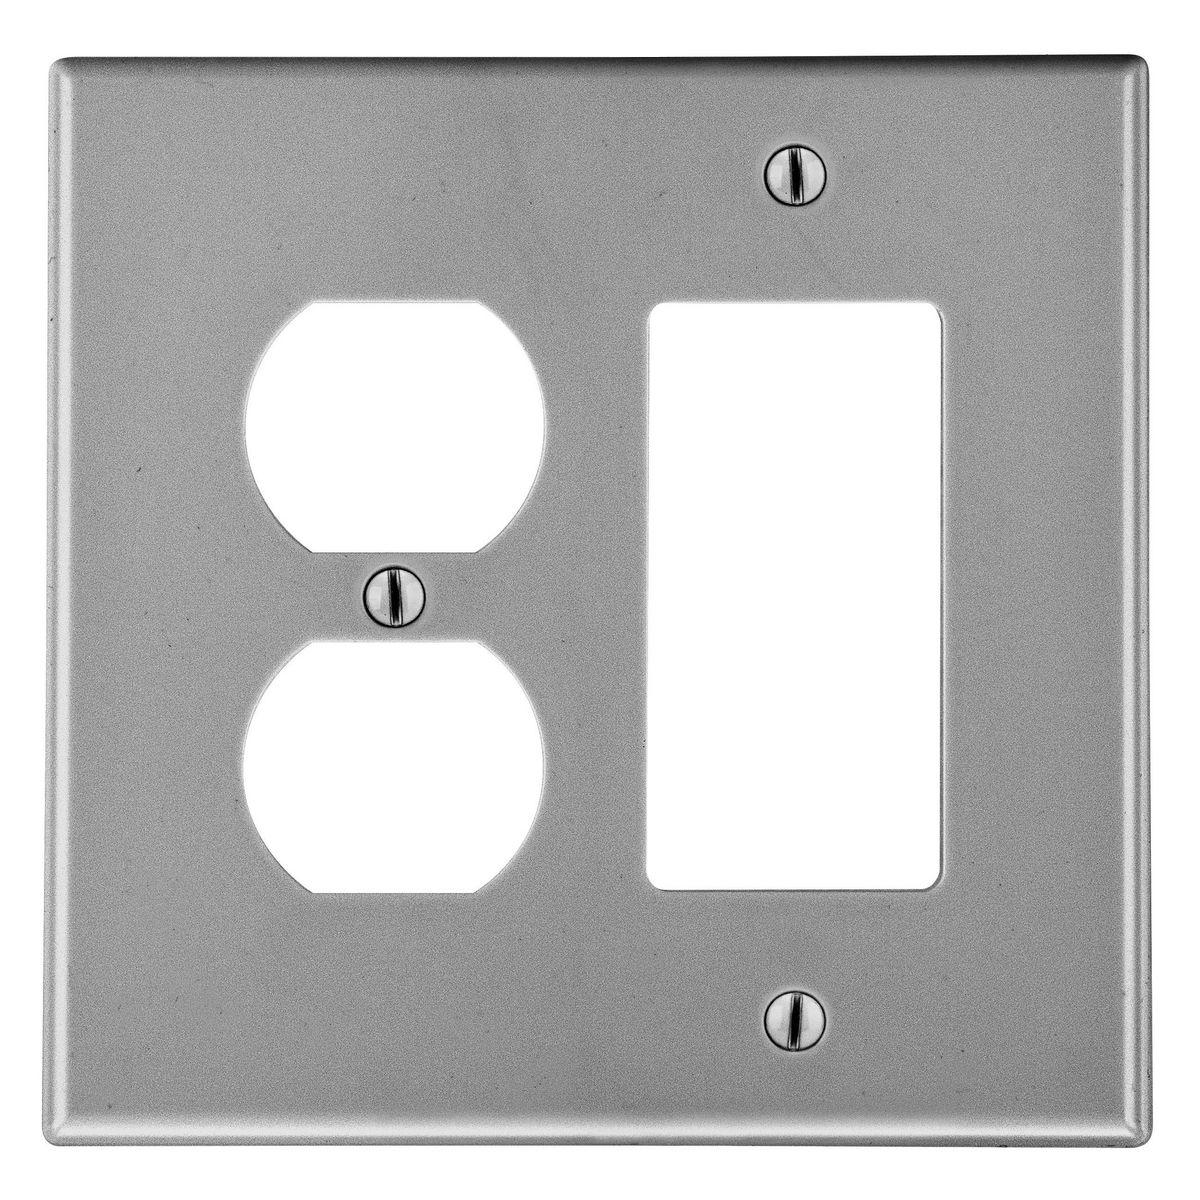 Hubbell PJ826GY Wallplate, Mid-Size 2-Gang, 1) Duplex 1) Decorator, Gray  ; High-impact, self-extinguishing polycarbonate material ; More Rigid ; Sharp lines and less dimpling ; Smooth satin finish ; Blends into wall with an optimum finish ; Smooth Satin Finish